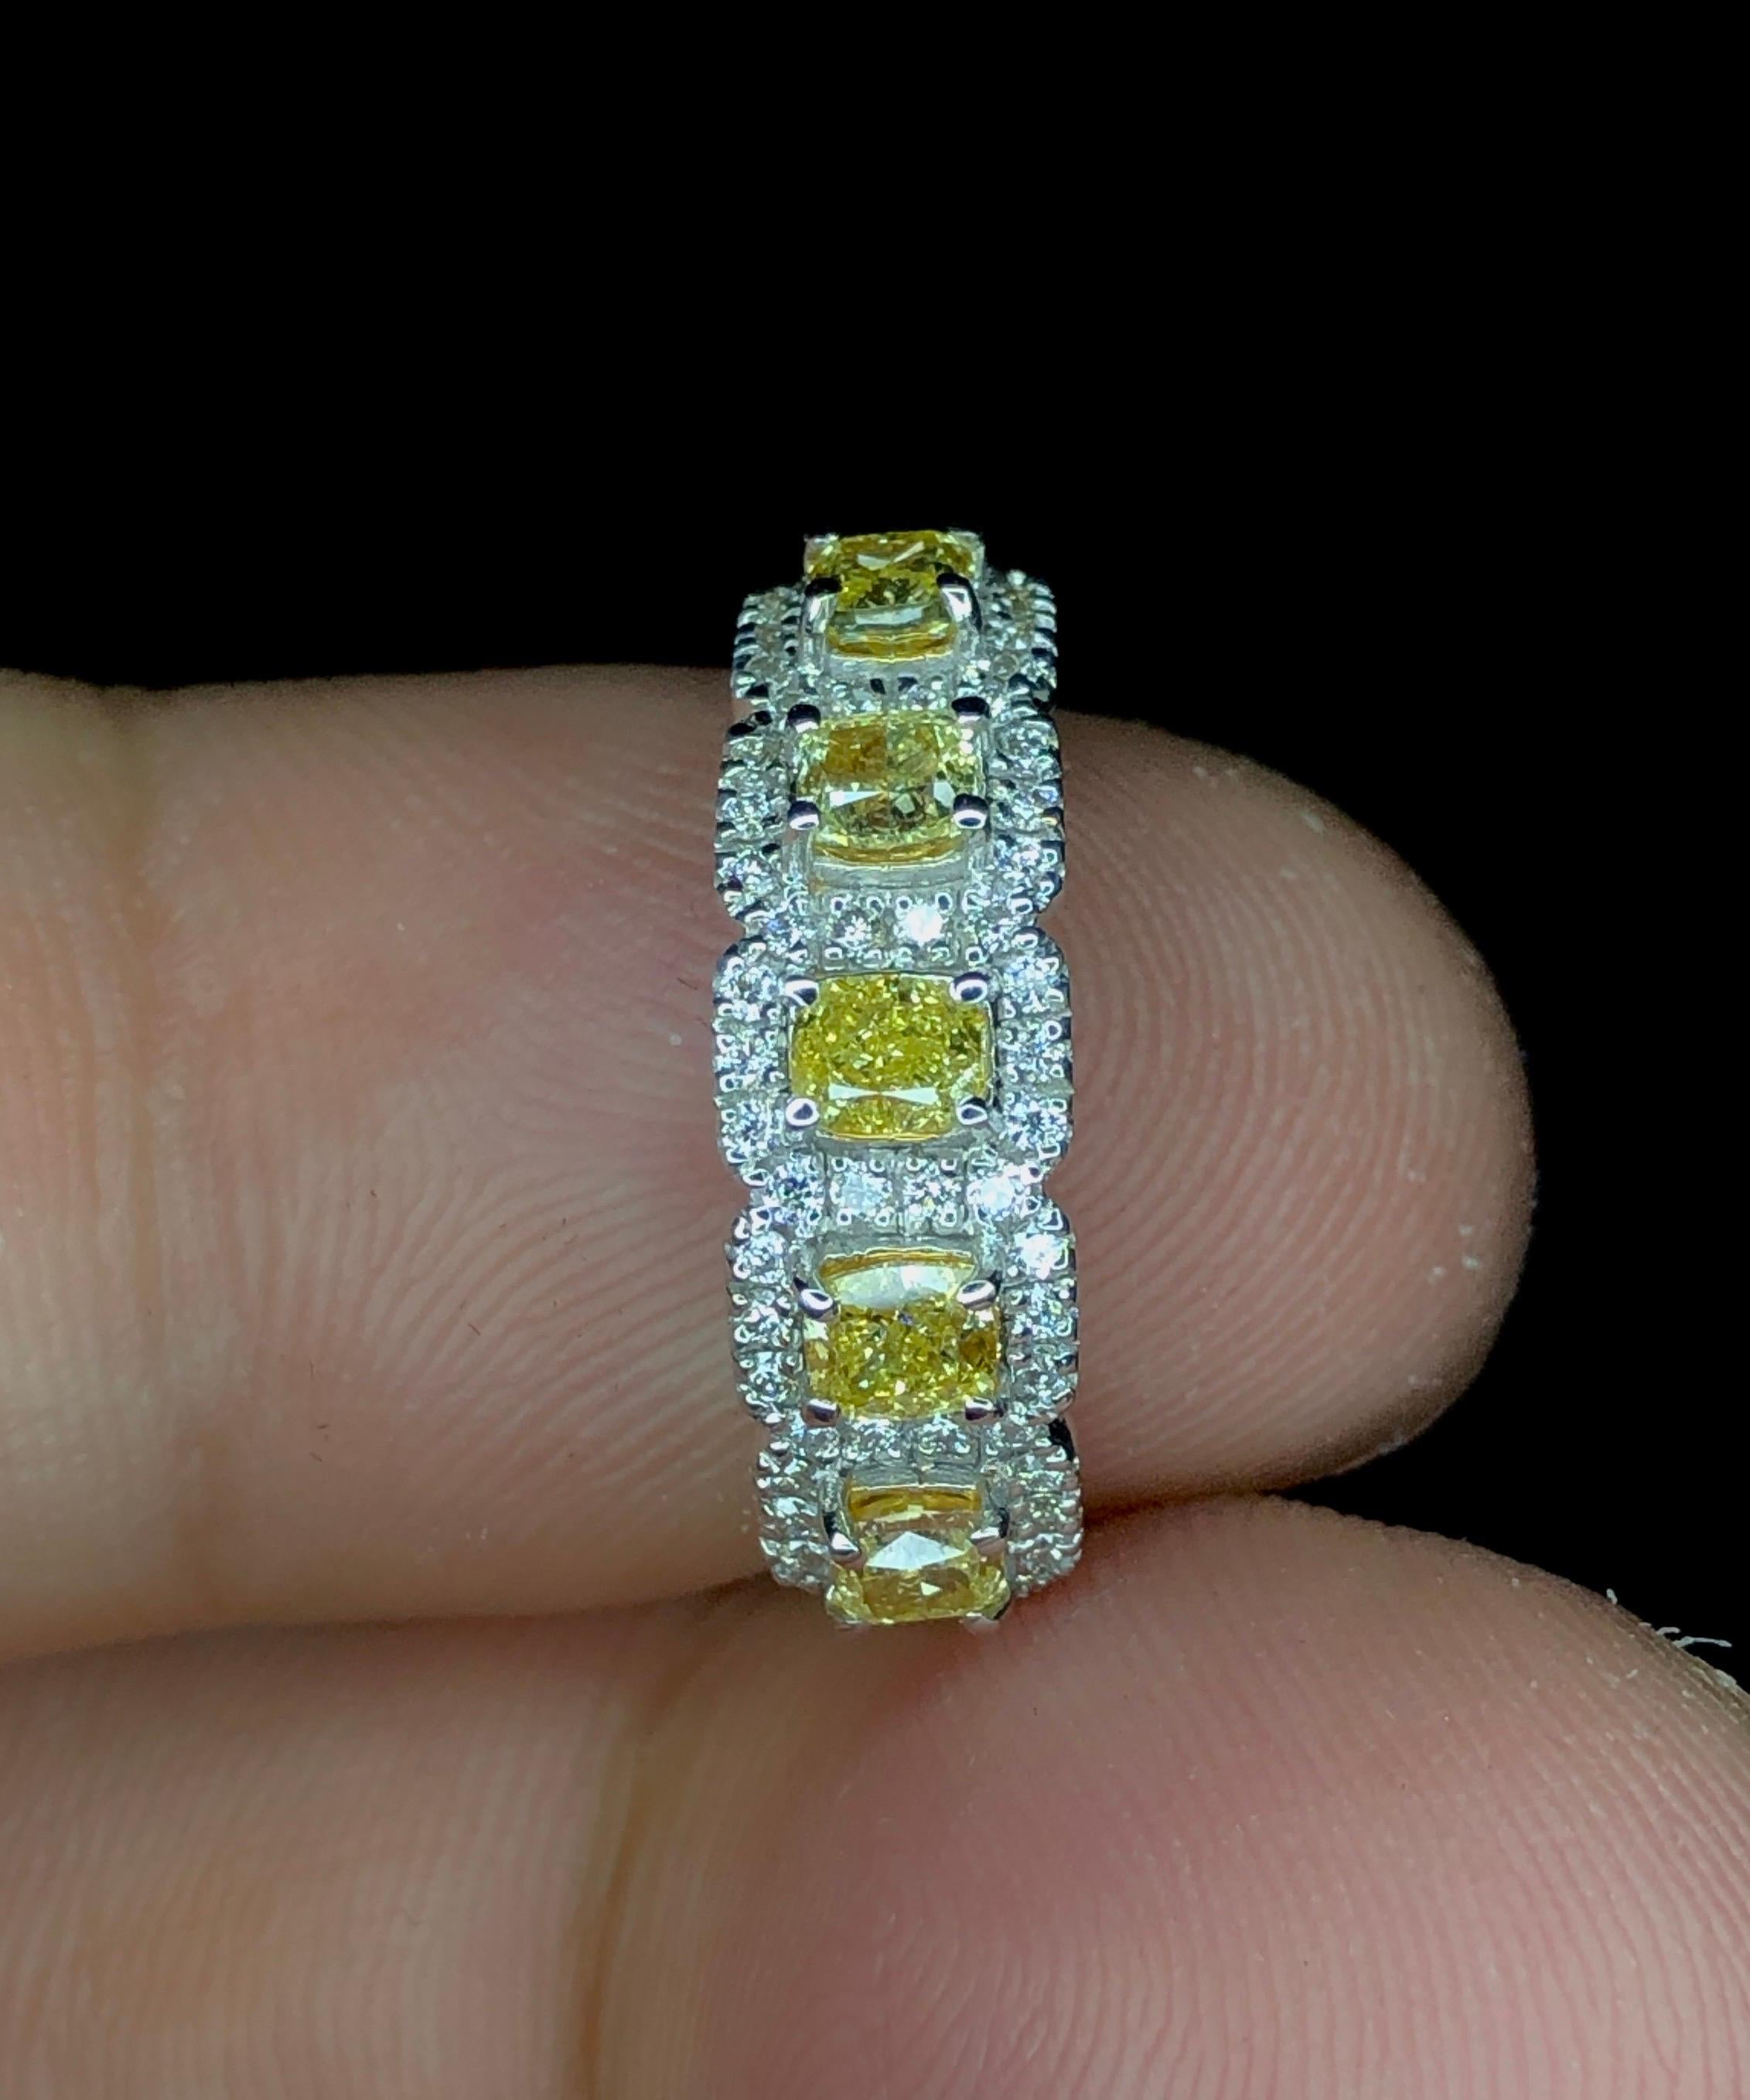 Introducing our exquisite Yellow and White Diamond Ring! Crafted in luxurious 18K gold, this stunning piece features 5 vibrant yellow diamonds totaling 0.96 carats, complemented by 54 dazzling white diamonds totaling 0.27 carats. Make a statement